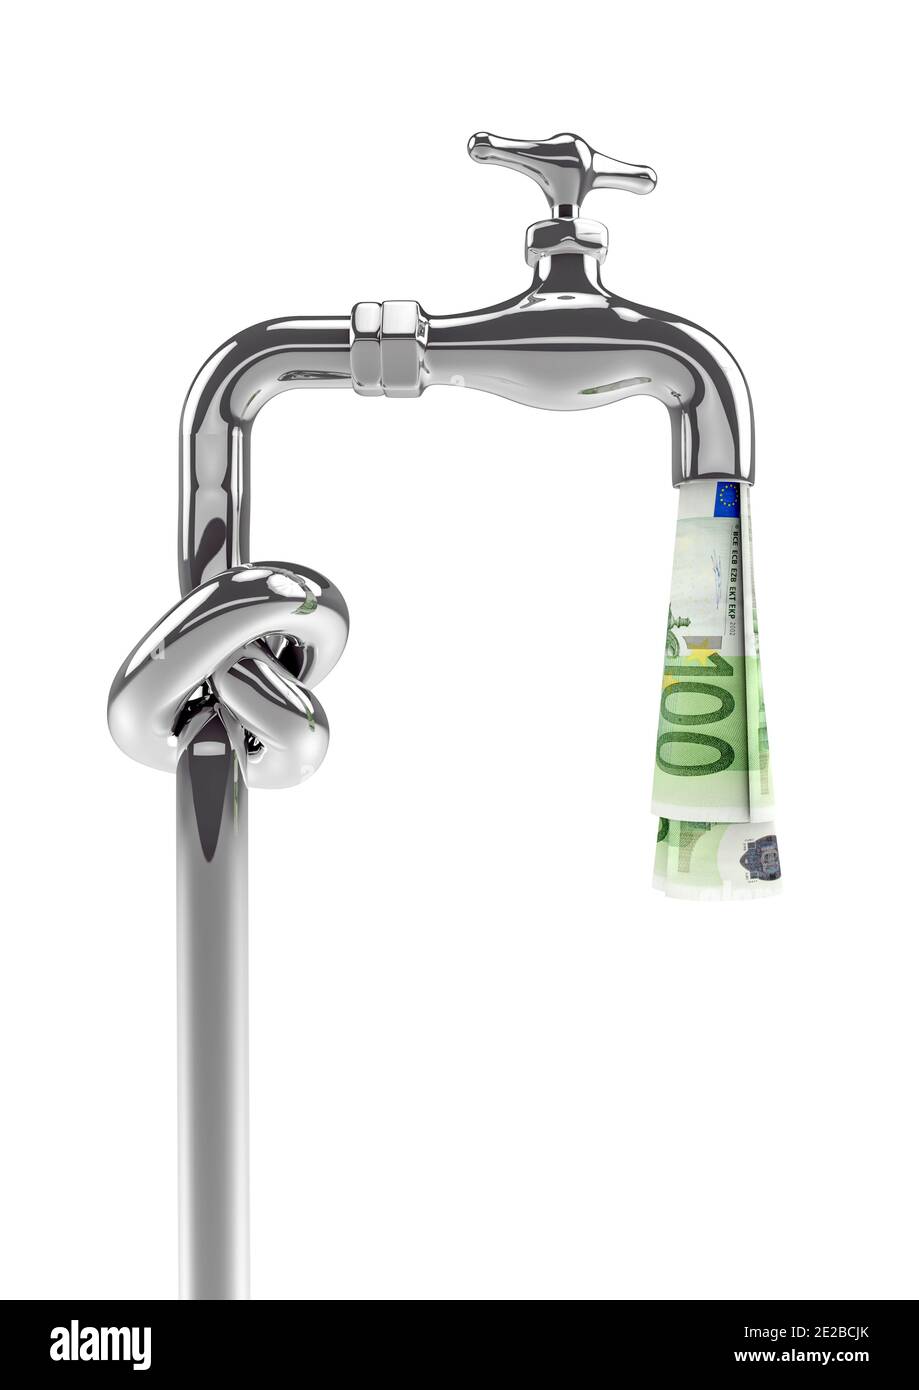 Knot tap money faucet euros / 3D illustration of chrome tap with knotted pipe shutting off funds of hundred euro notes isolated on white studio backgr Stock Photo